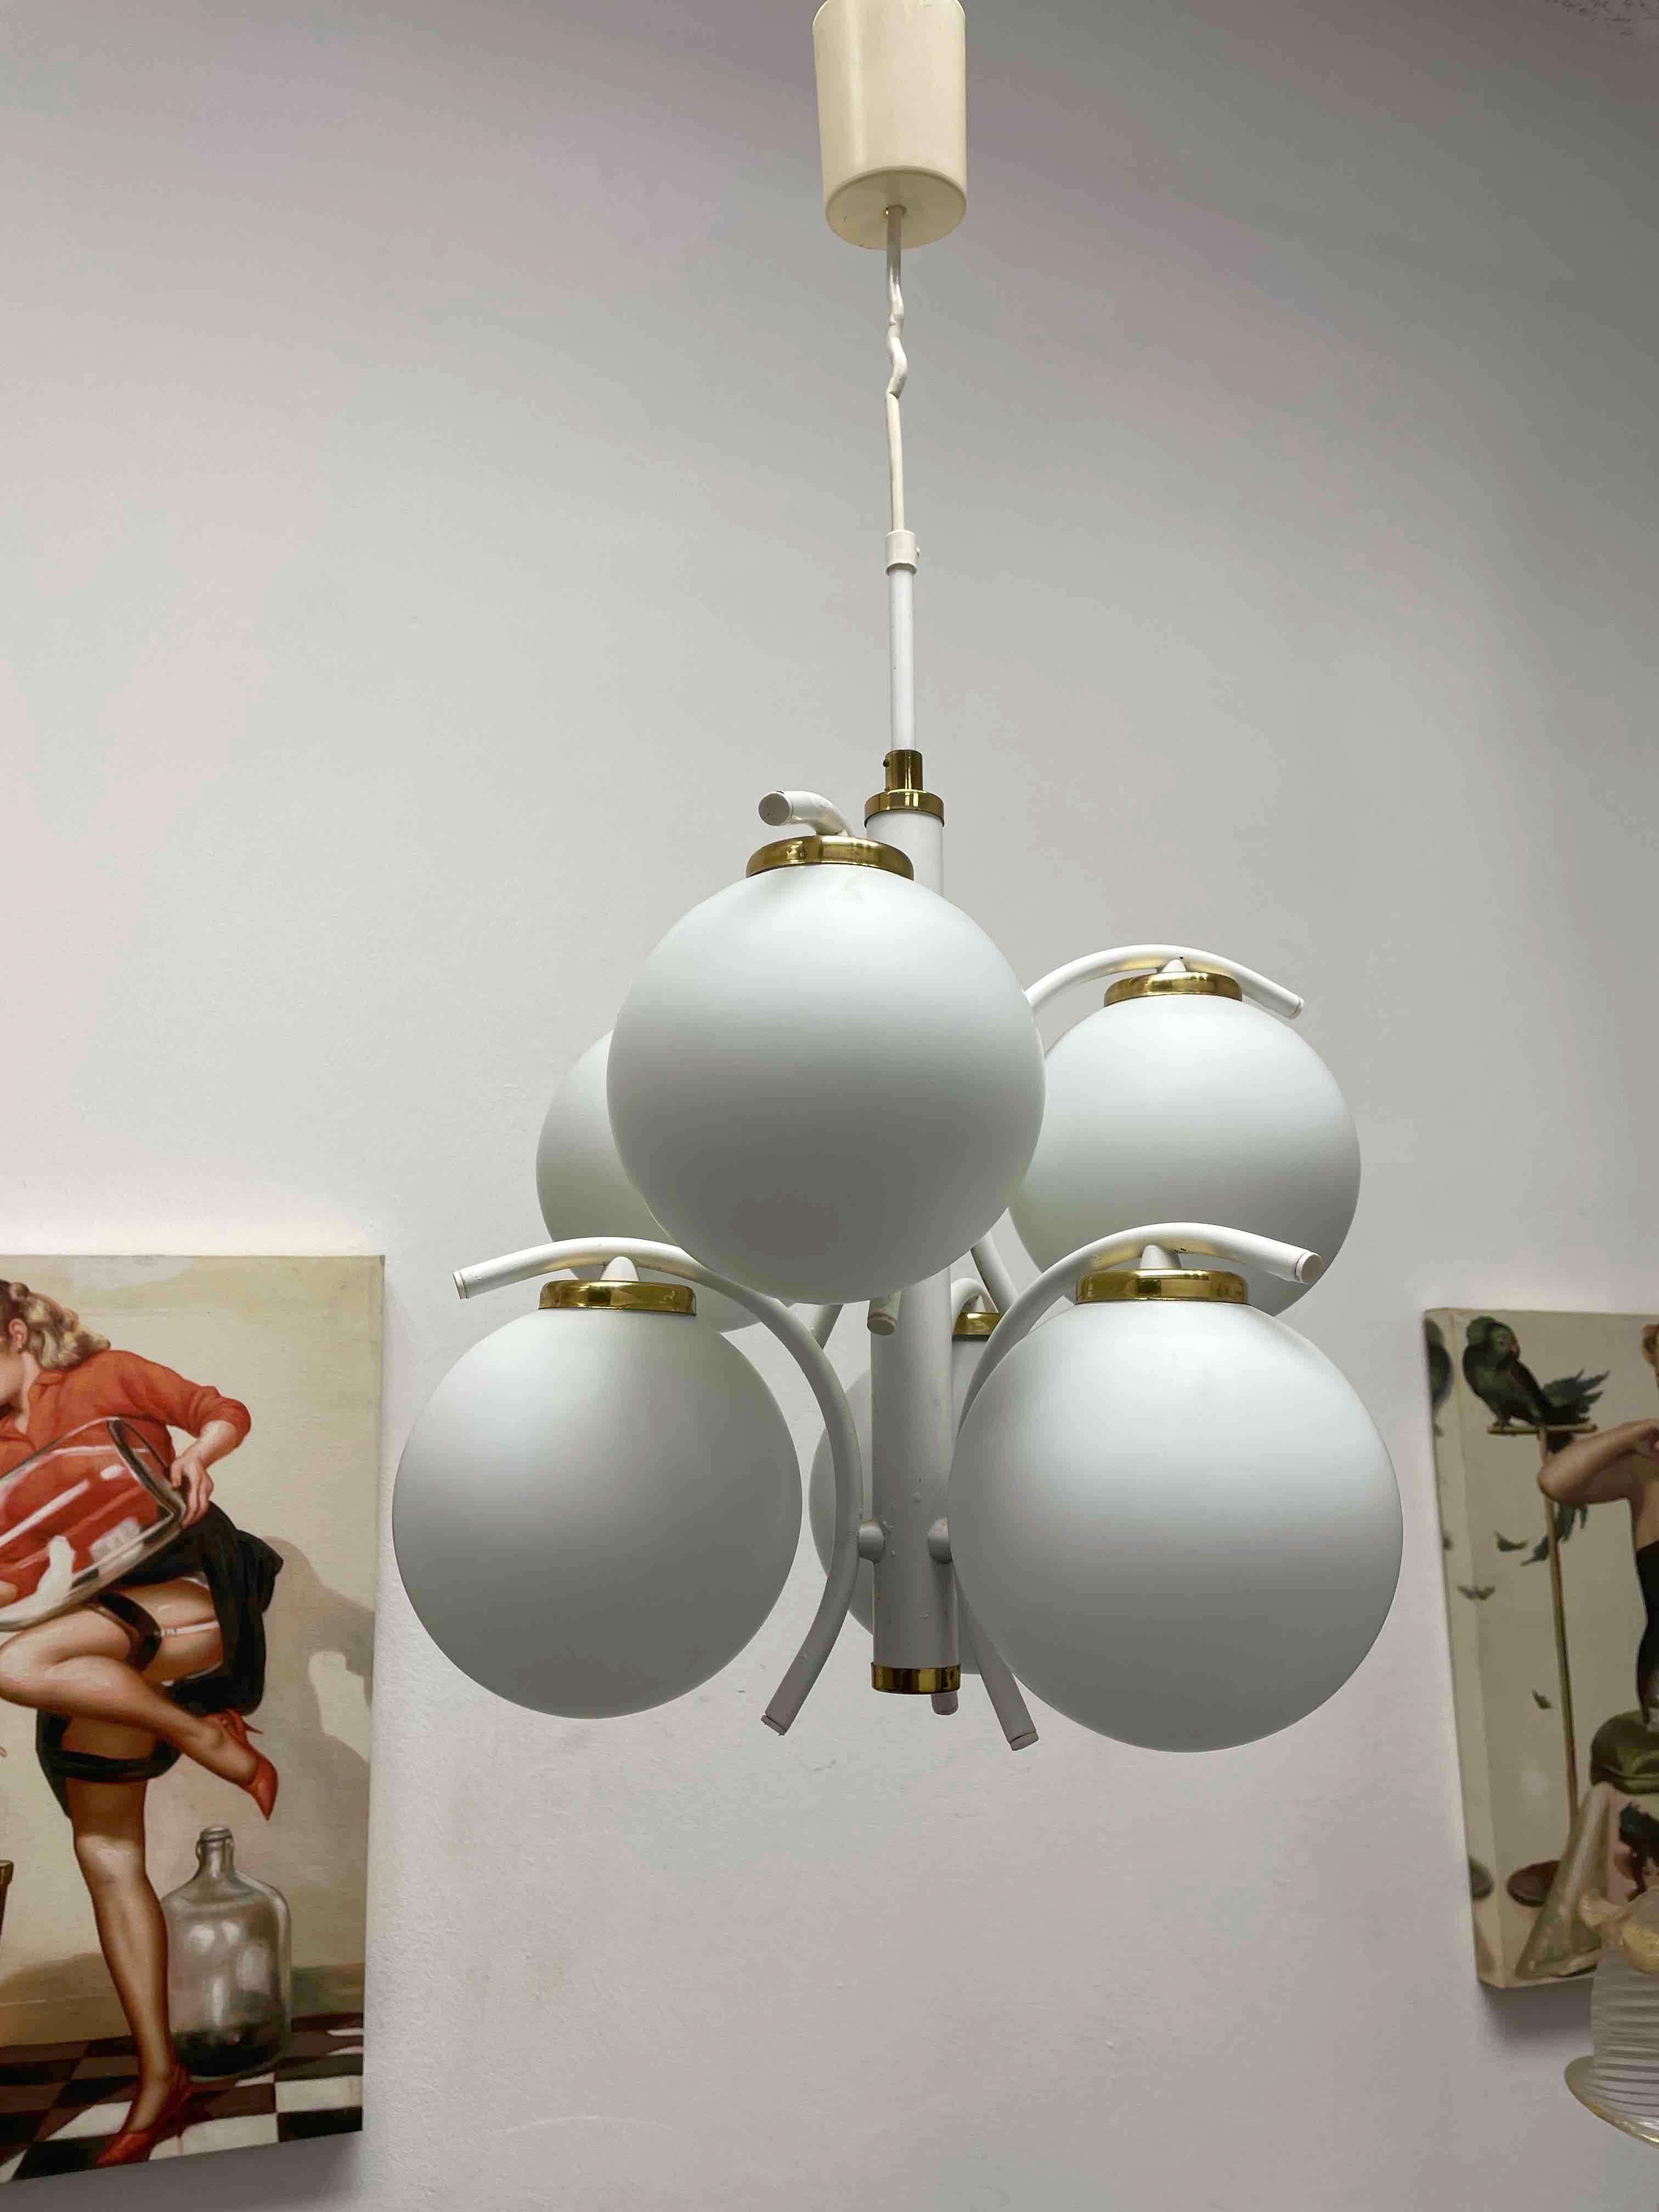 This Art Deco Bauhaus Style chandelier was made in the 1960s in Germany. It is made of six unique glass balls mounted on a white lacquered frame. The fixture requires six European E14 candelabra bulbs, each bulb up to 40 watts. A nice addition to